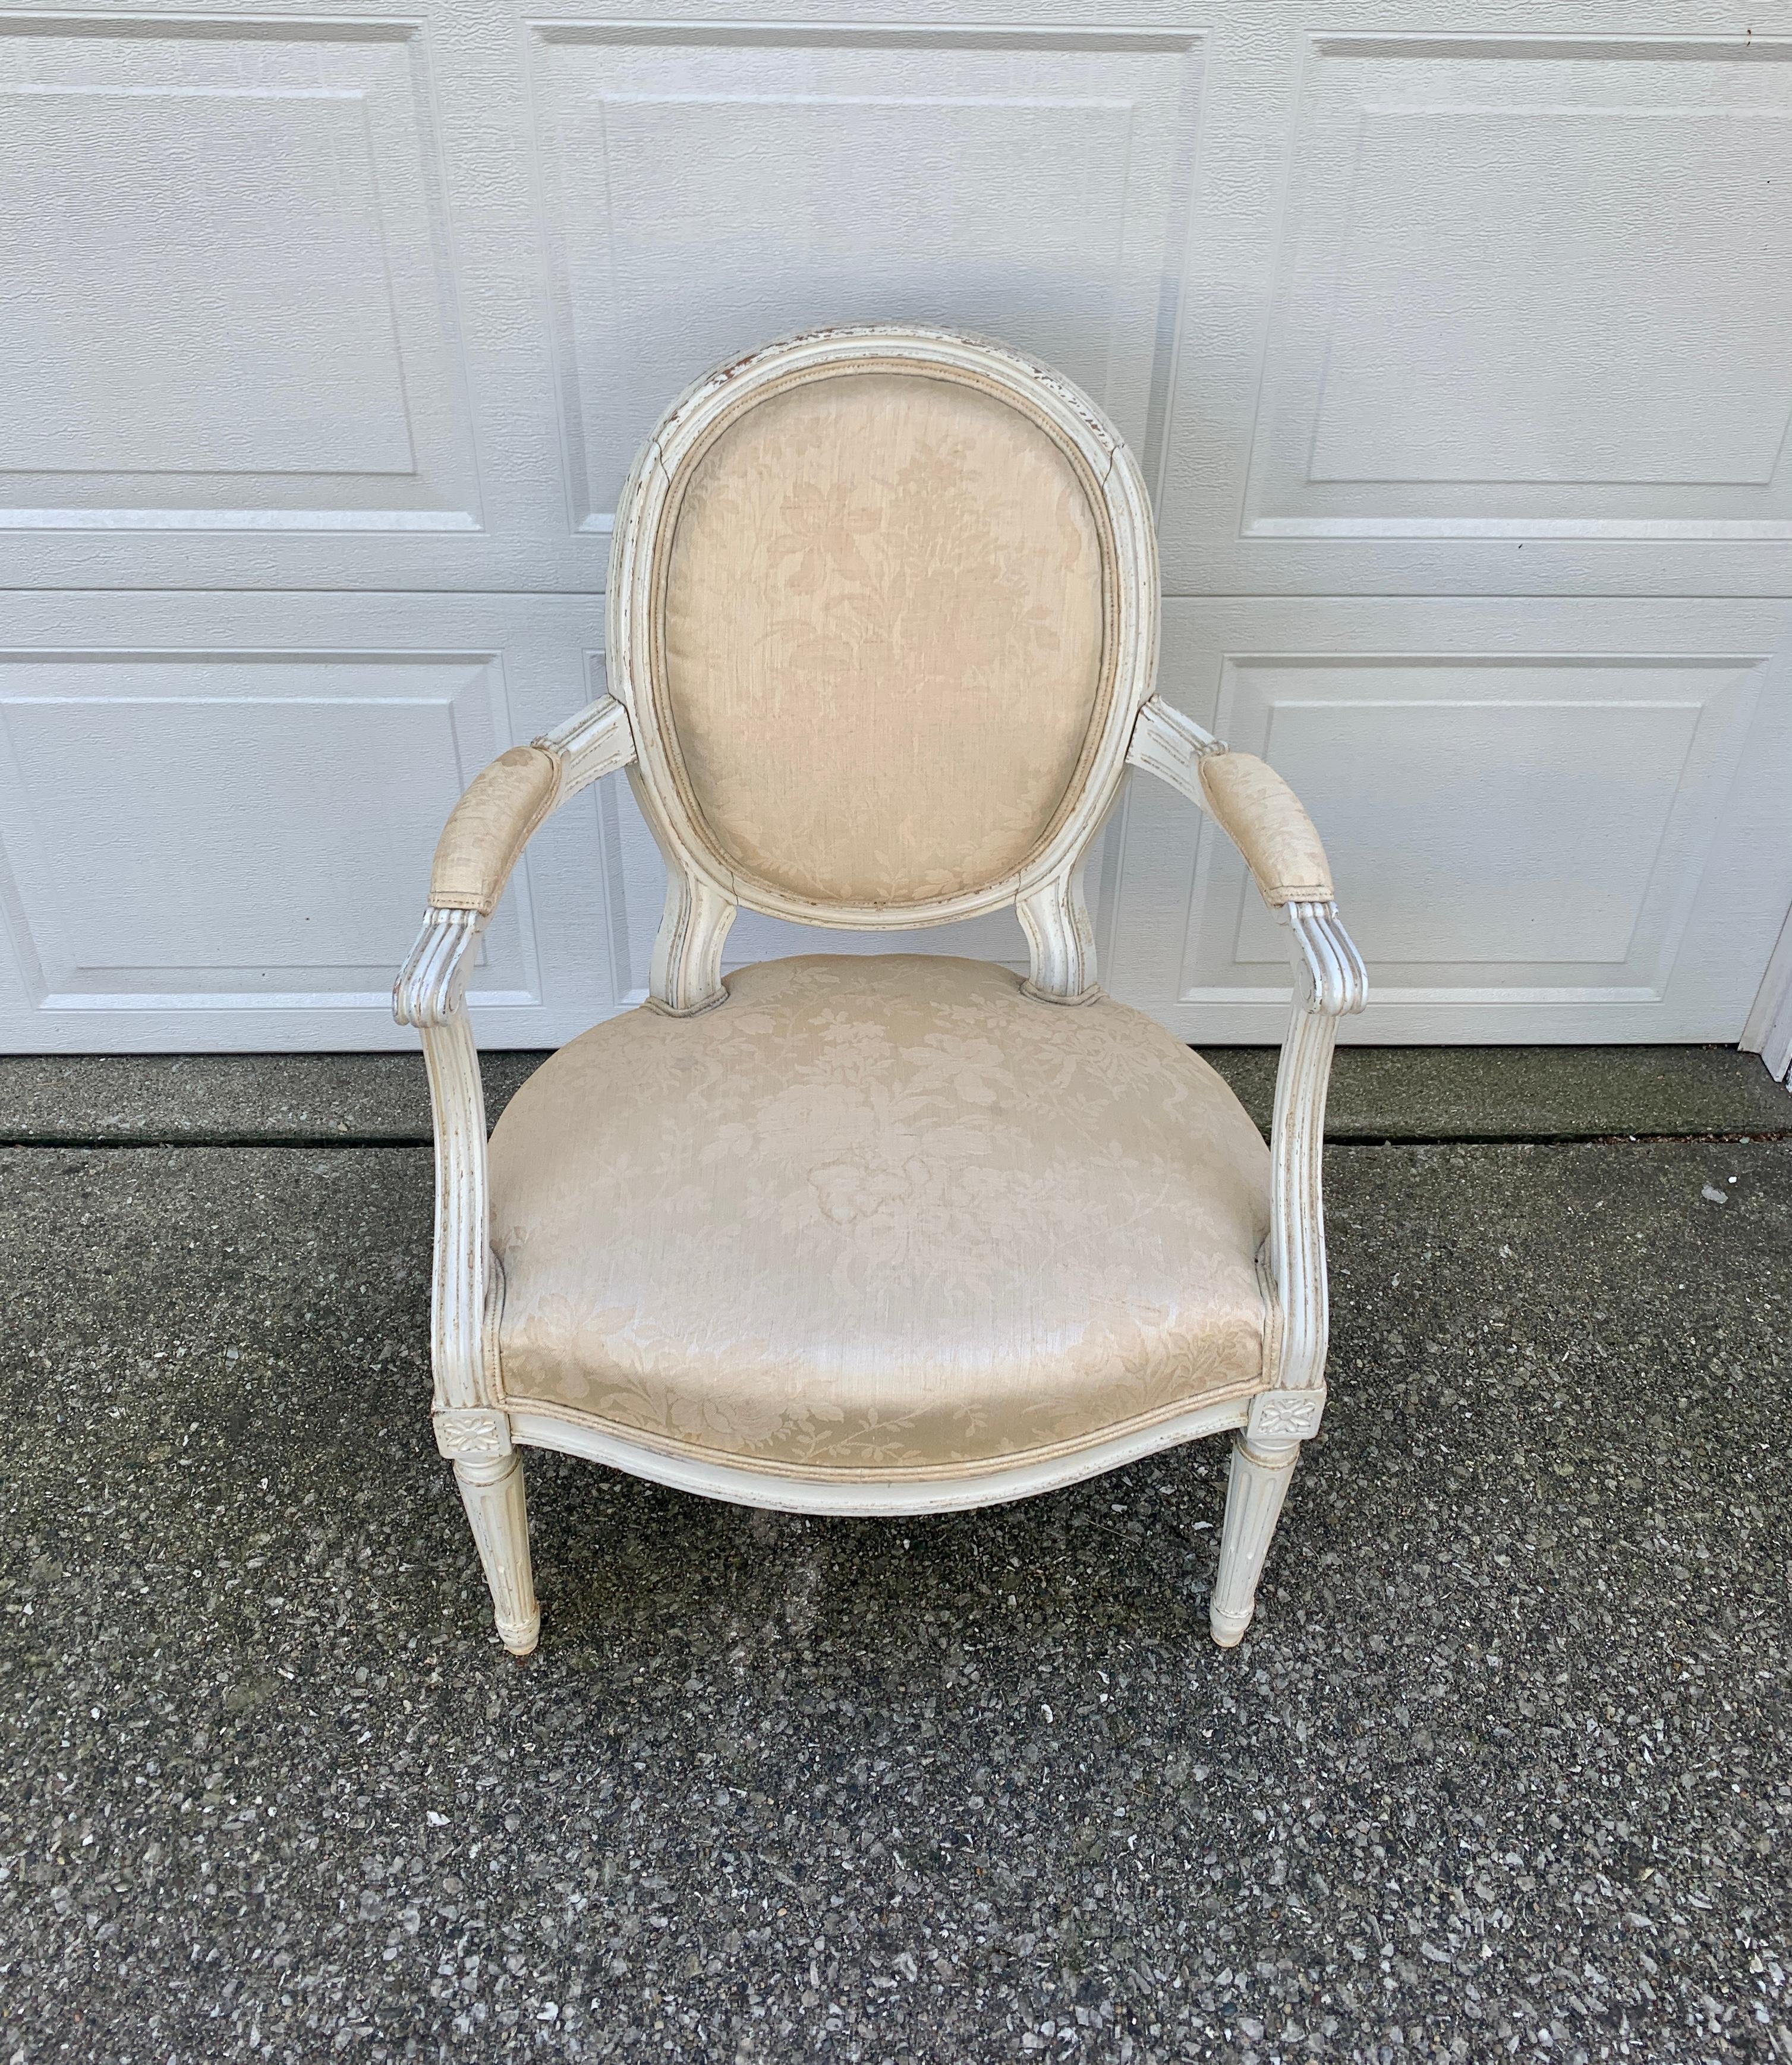 A stunning French Provincial Louis XVI style armchair

France, Circa 1920s

Carved painted wood frame, with cream damask patterned upholstery

Measures: 23.25